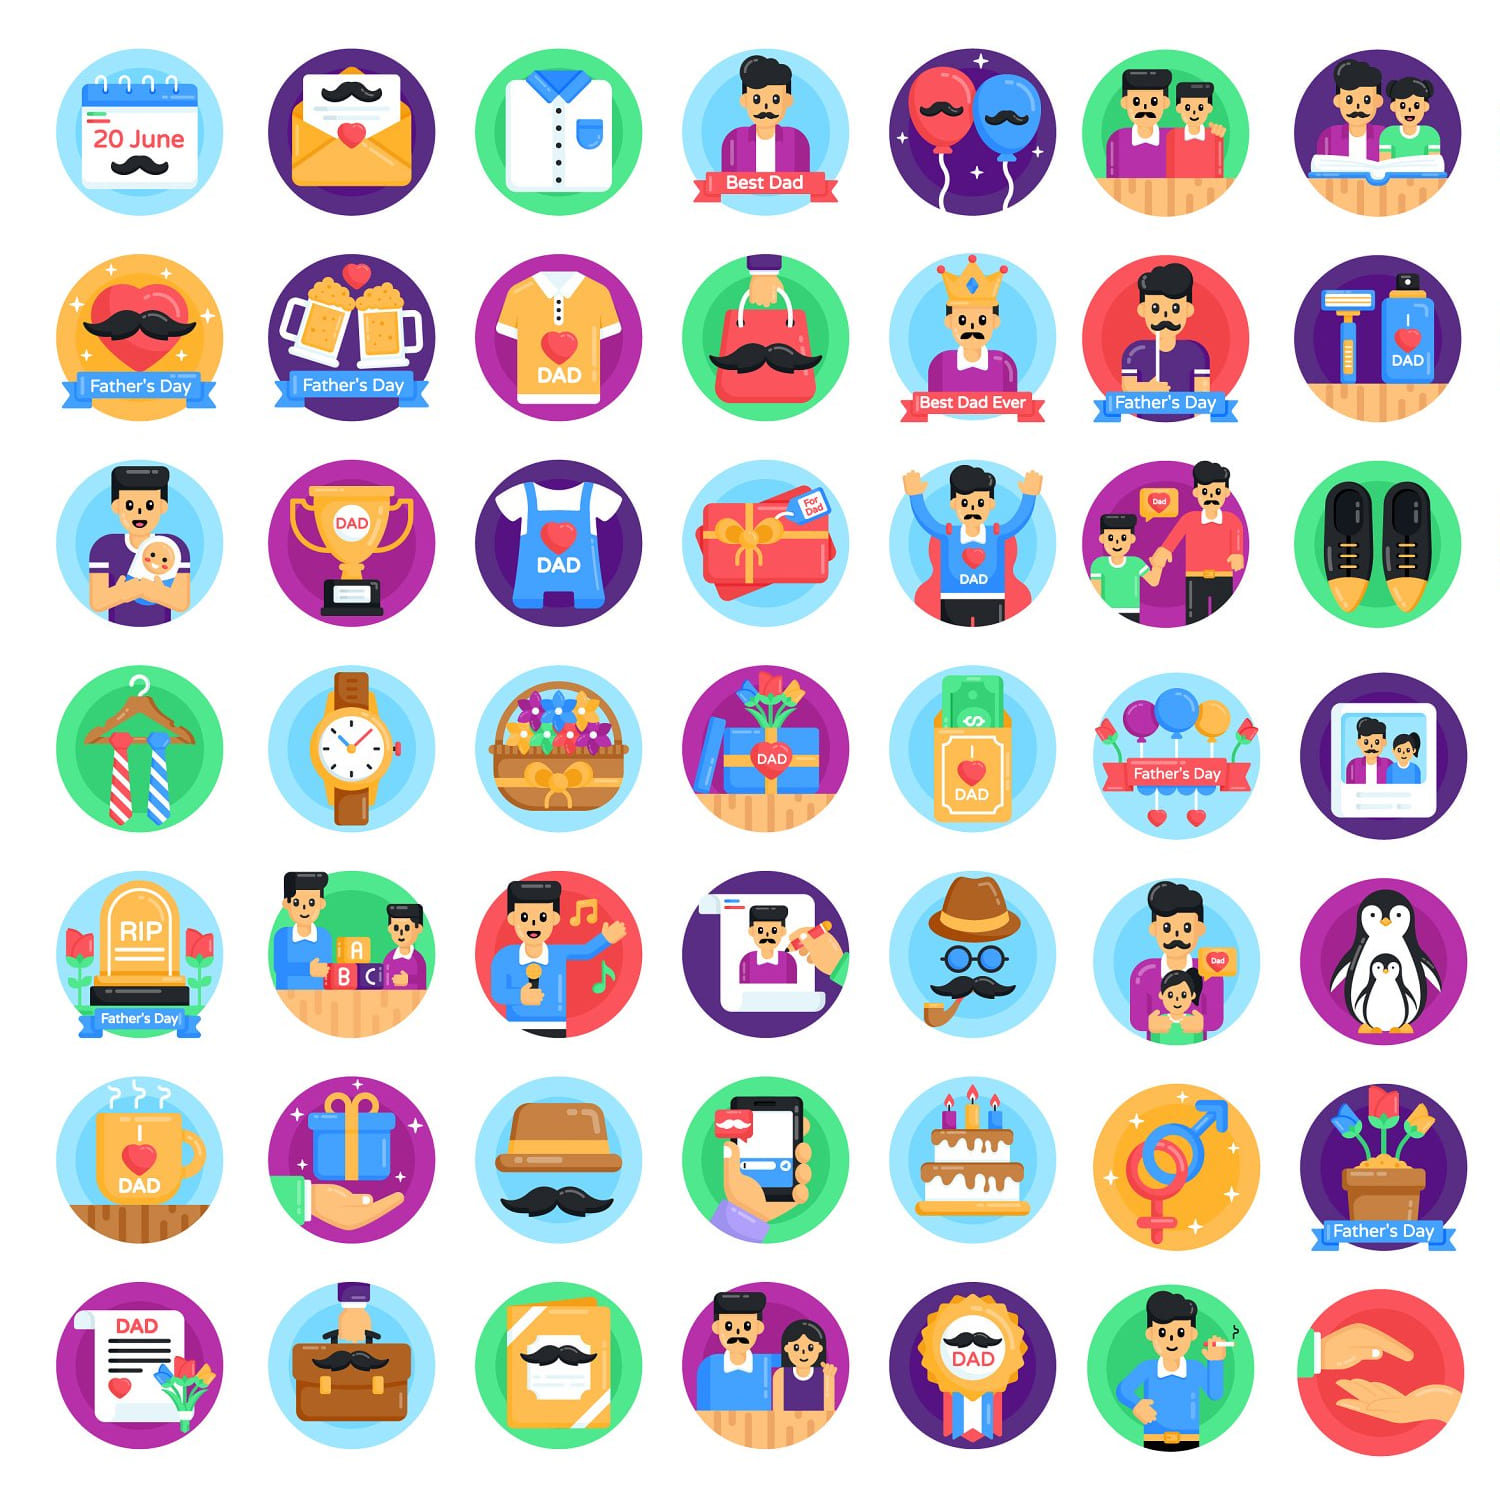 50 Father's Day Vector Icons cover.